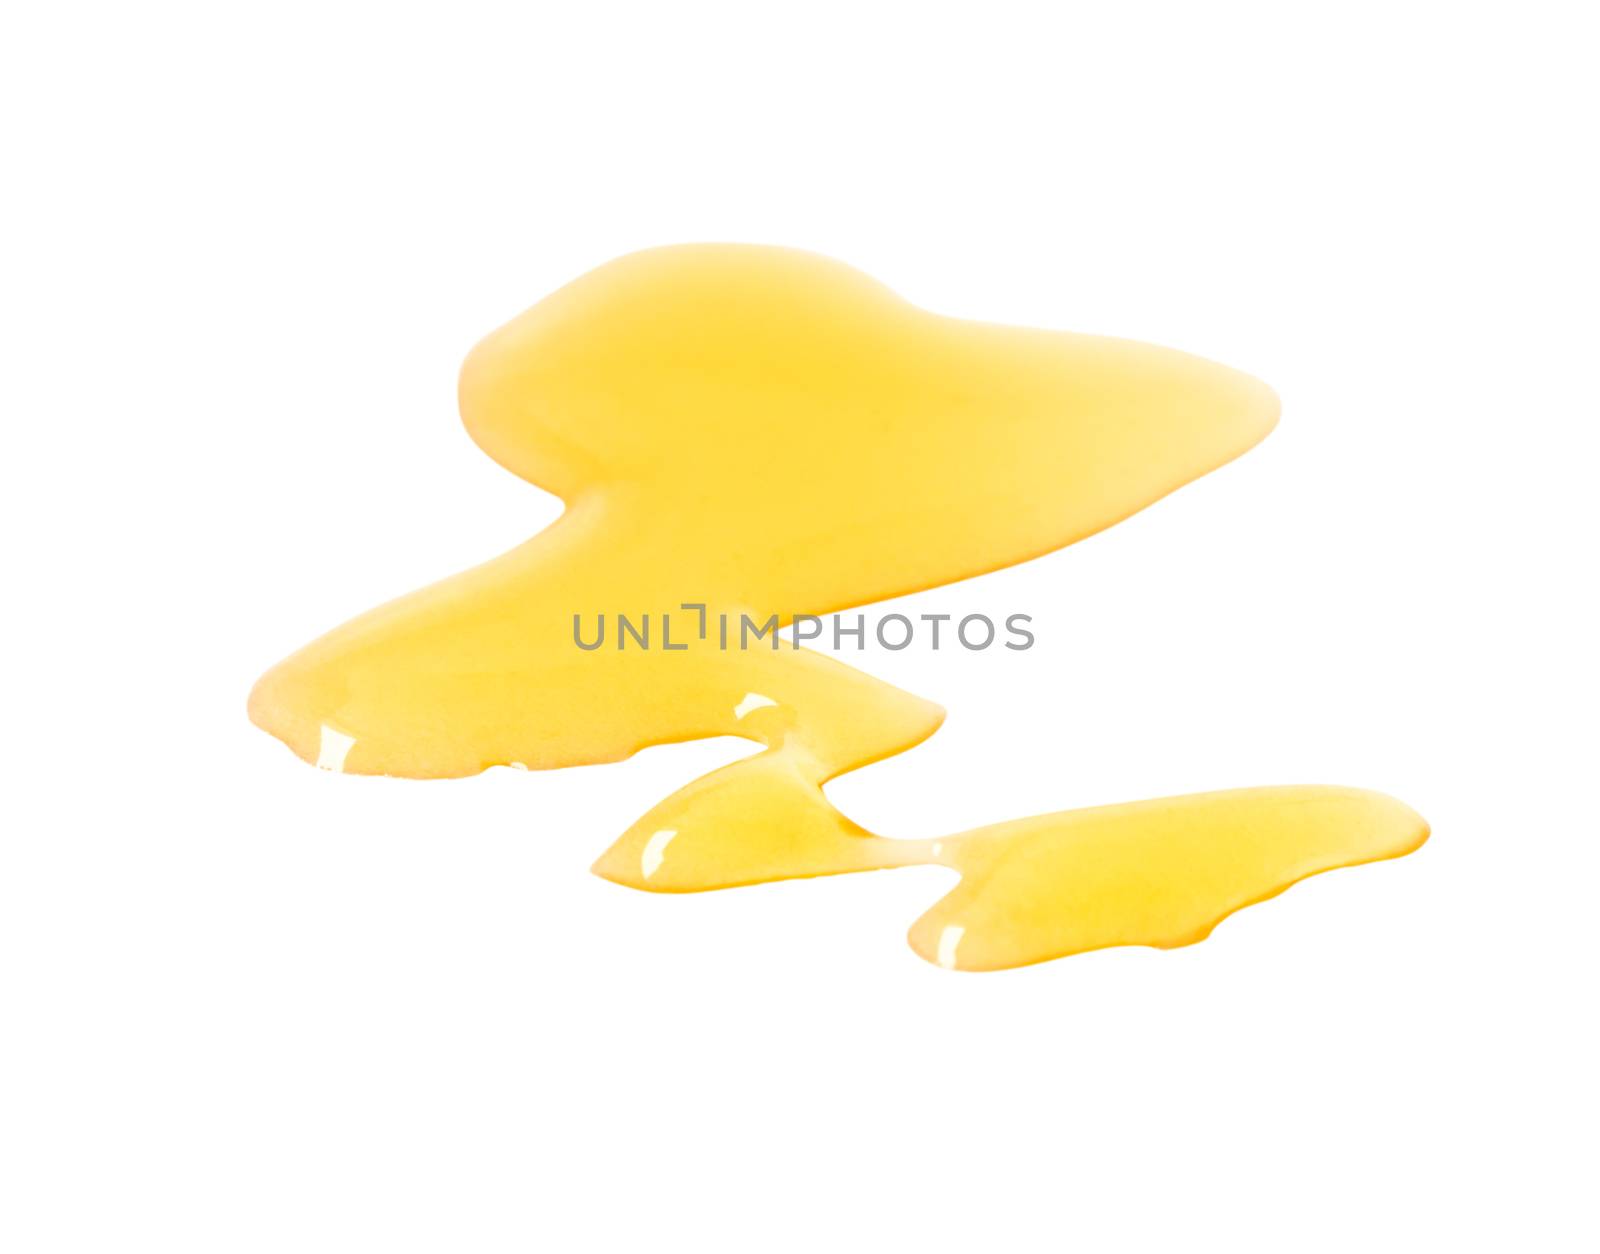 Sweet honey drop isolated on white background with clipping path by pt.pongsak@gmail.com